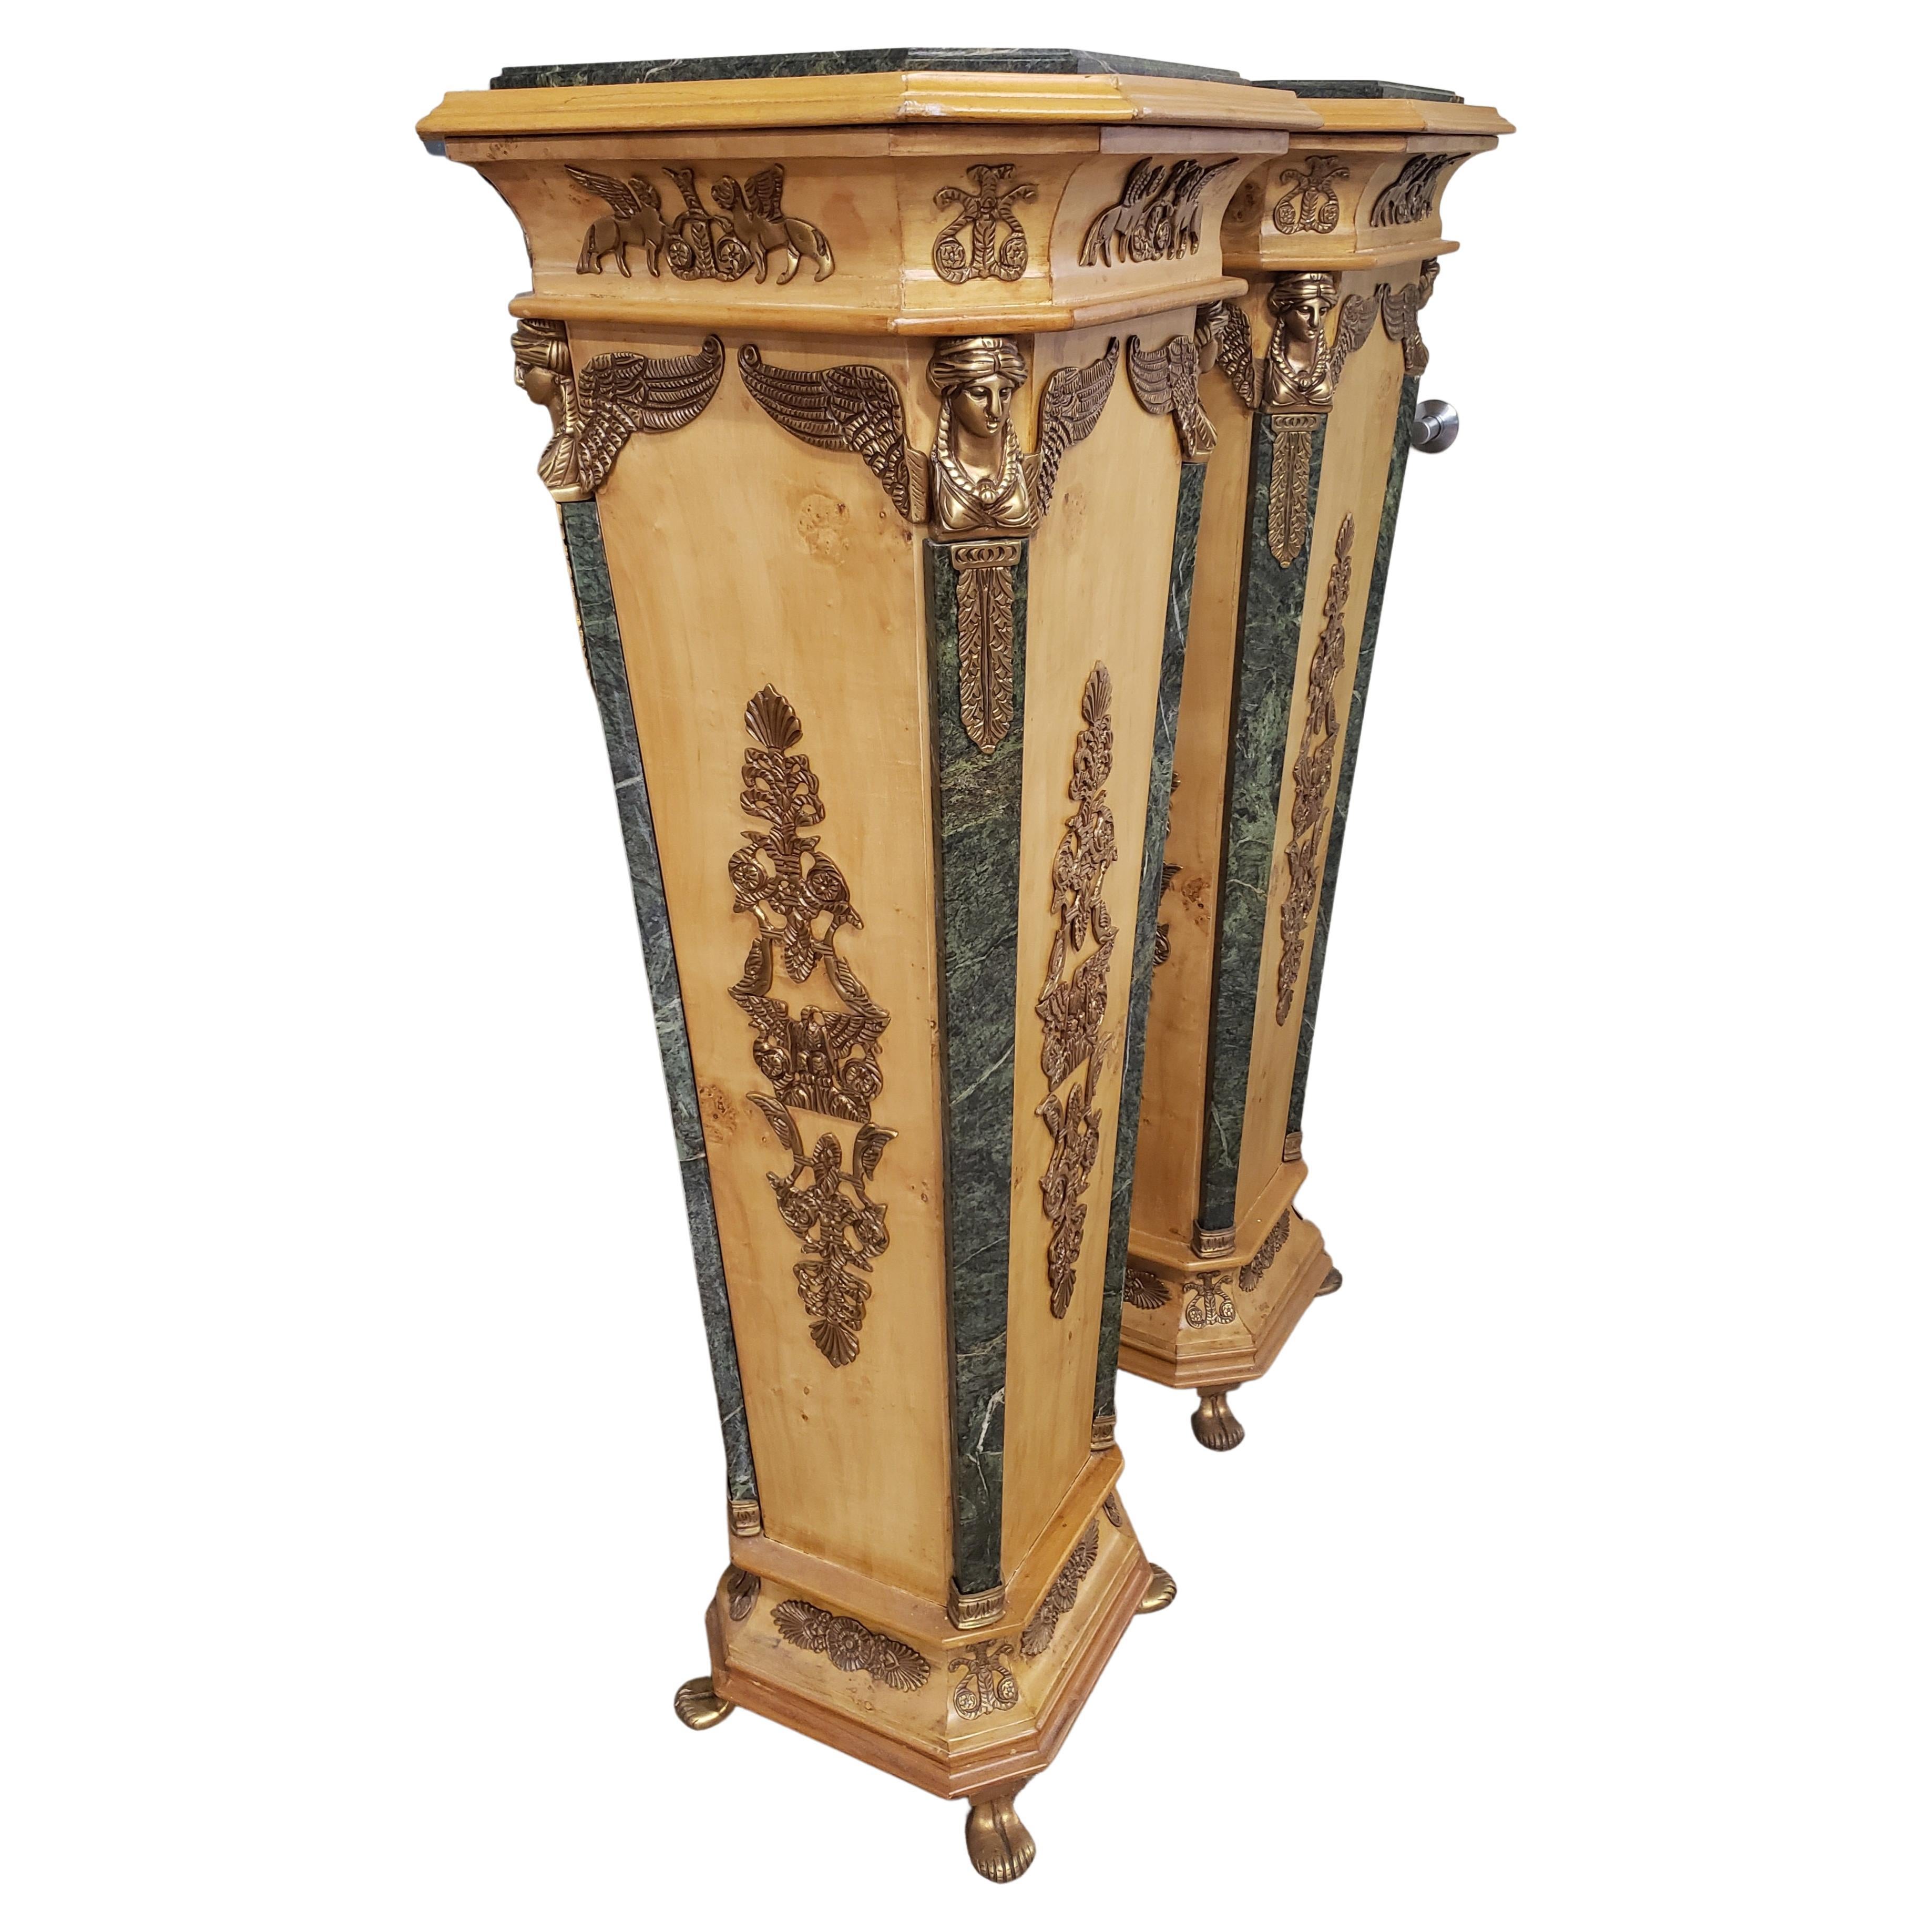 Louis XVI French Empire Gilt Bronze Ormolu Mottled Marble & Satinwood Pedestals, a Pair For Sale